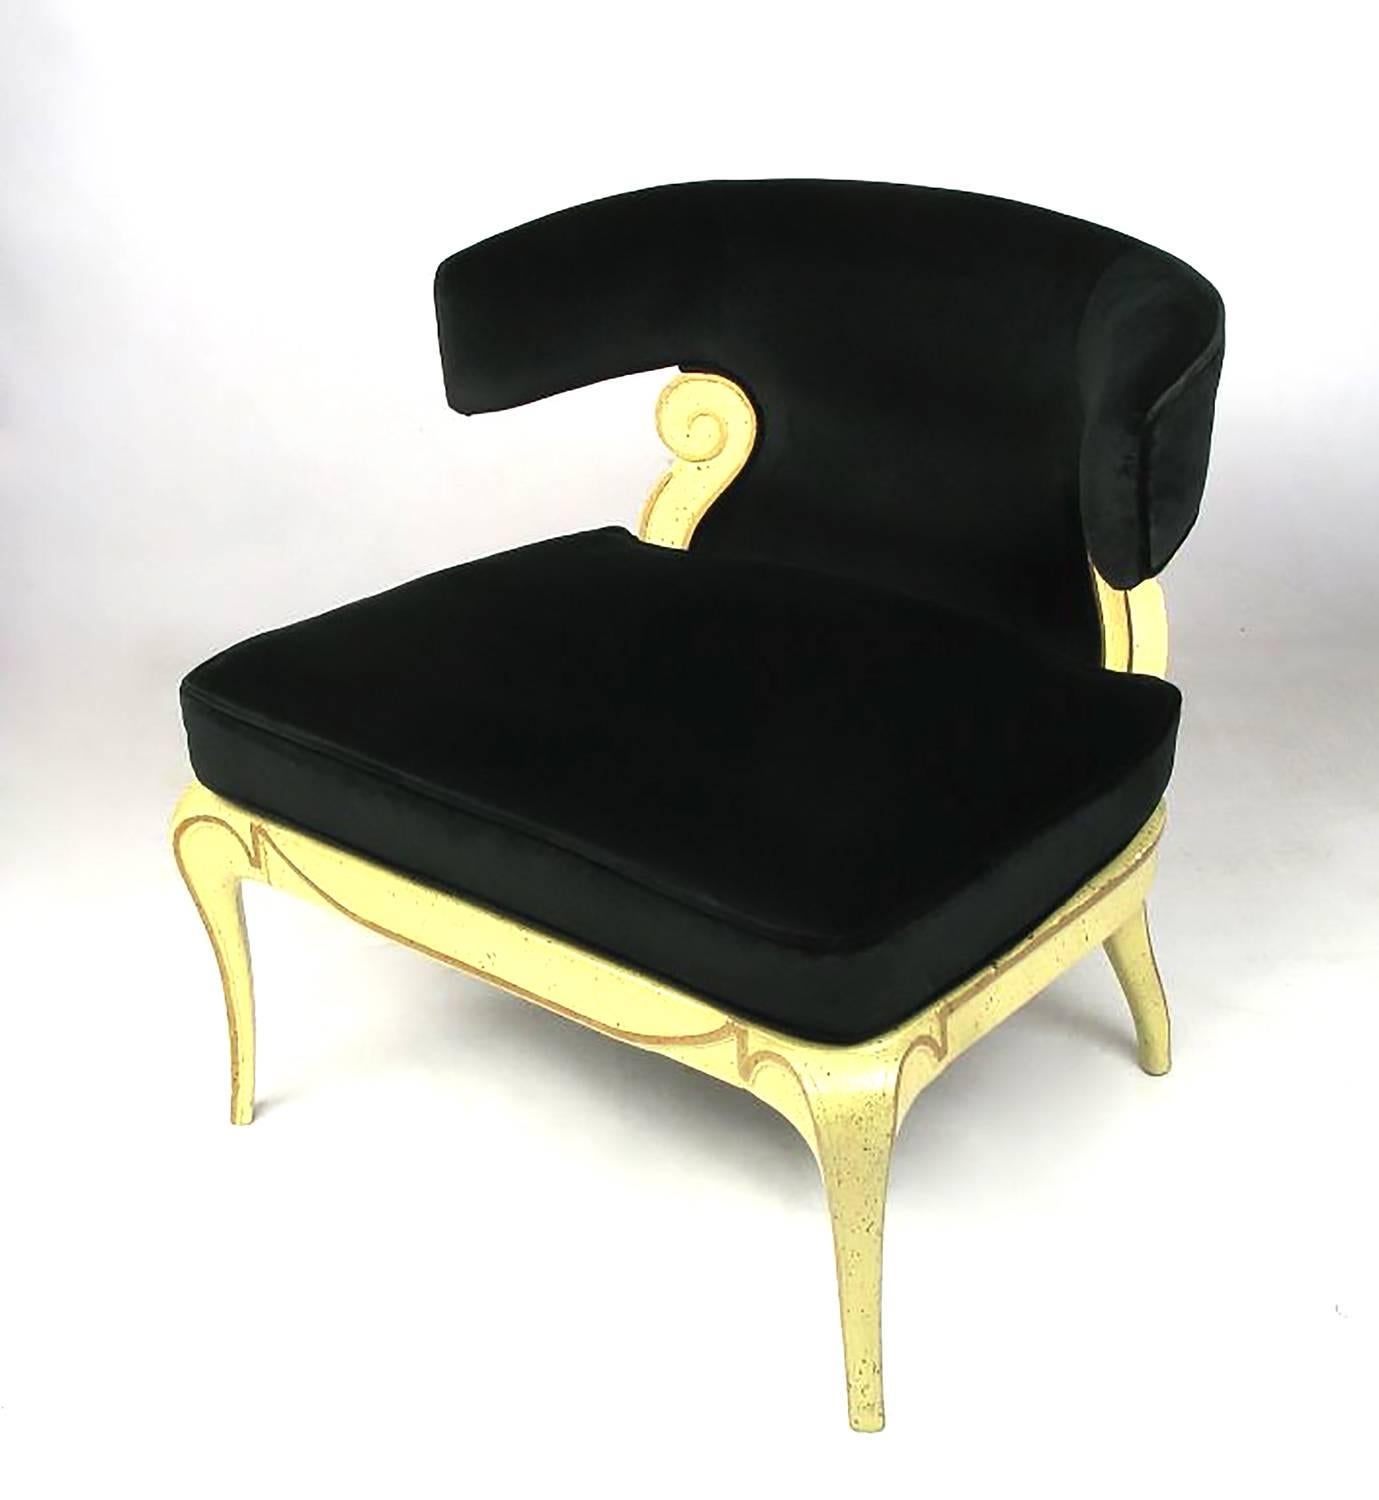 Grosfeld House slipper chair with new black velvet, aged creamy lacquer and parcel-gilt finish. Unusual tapered legs and curved back.